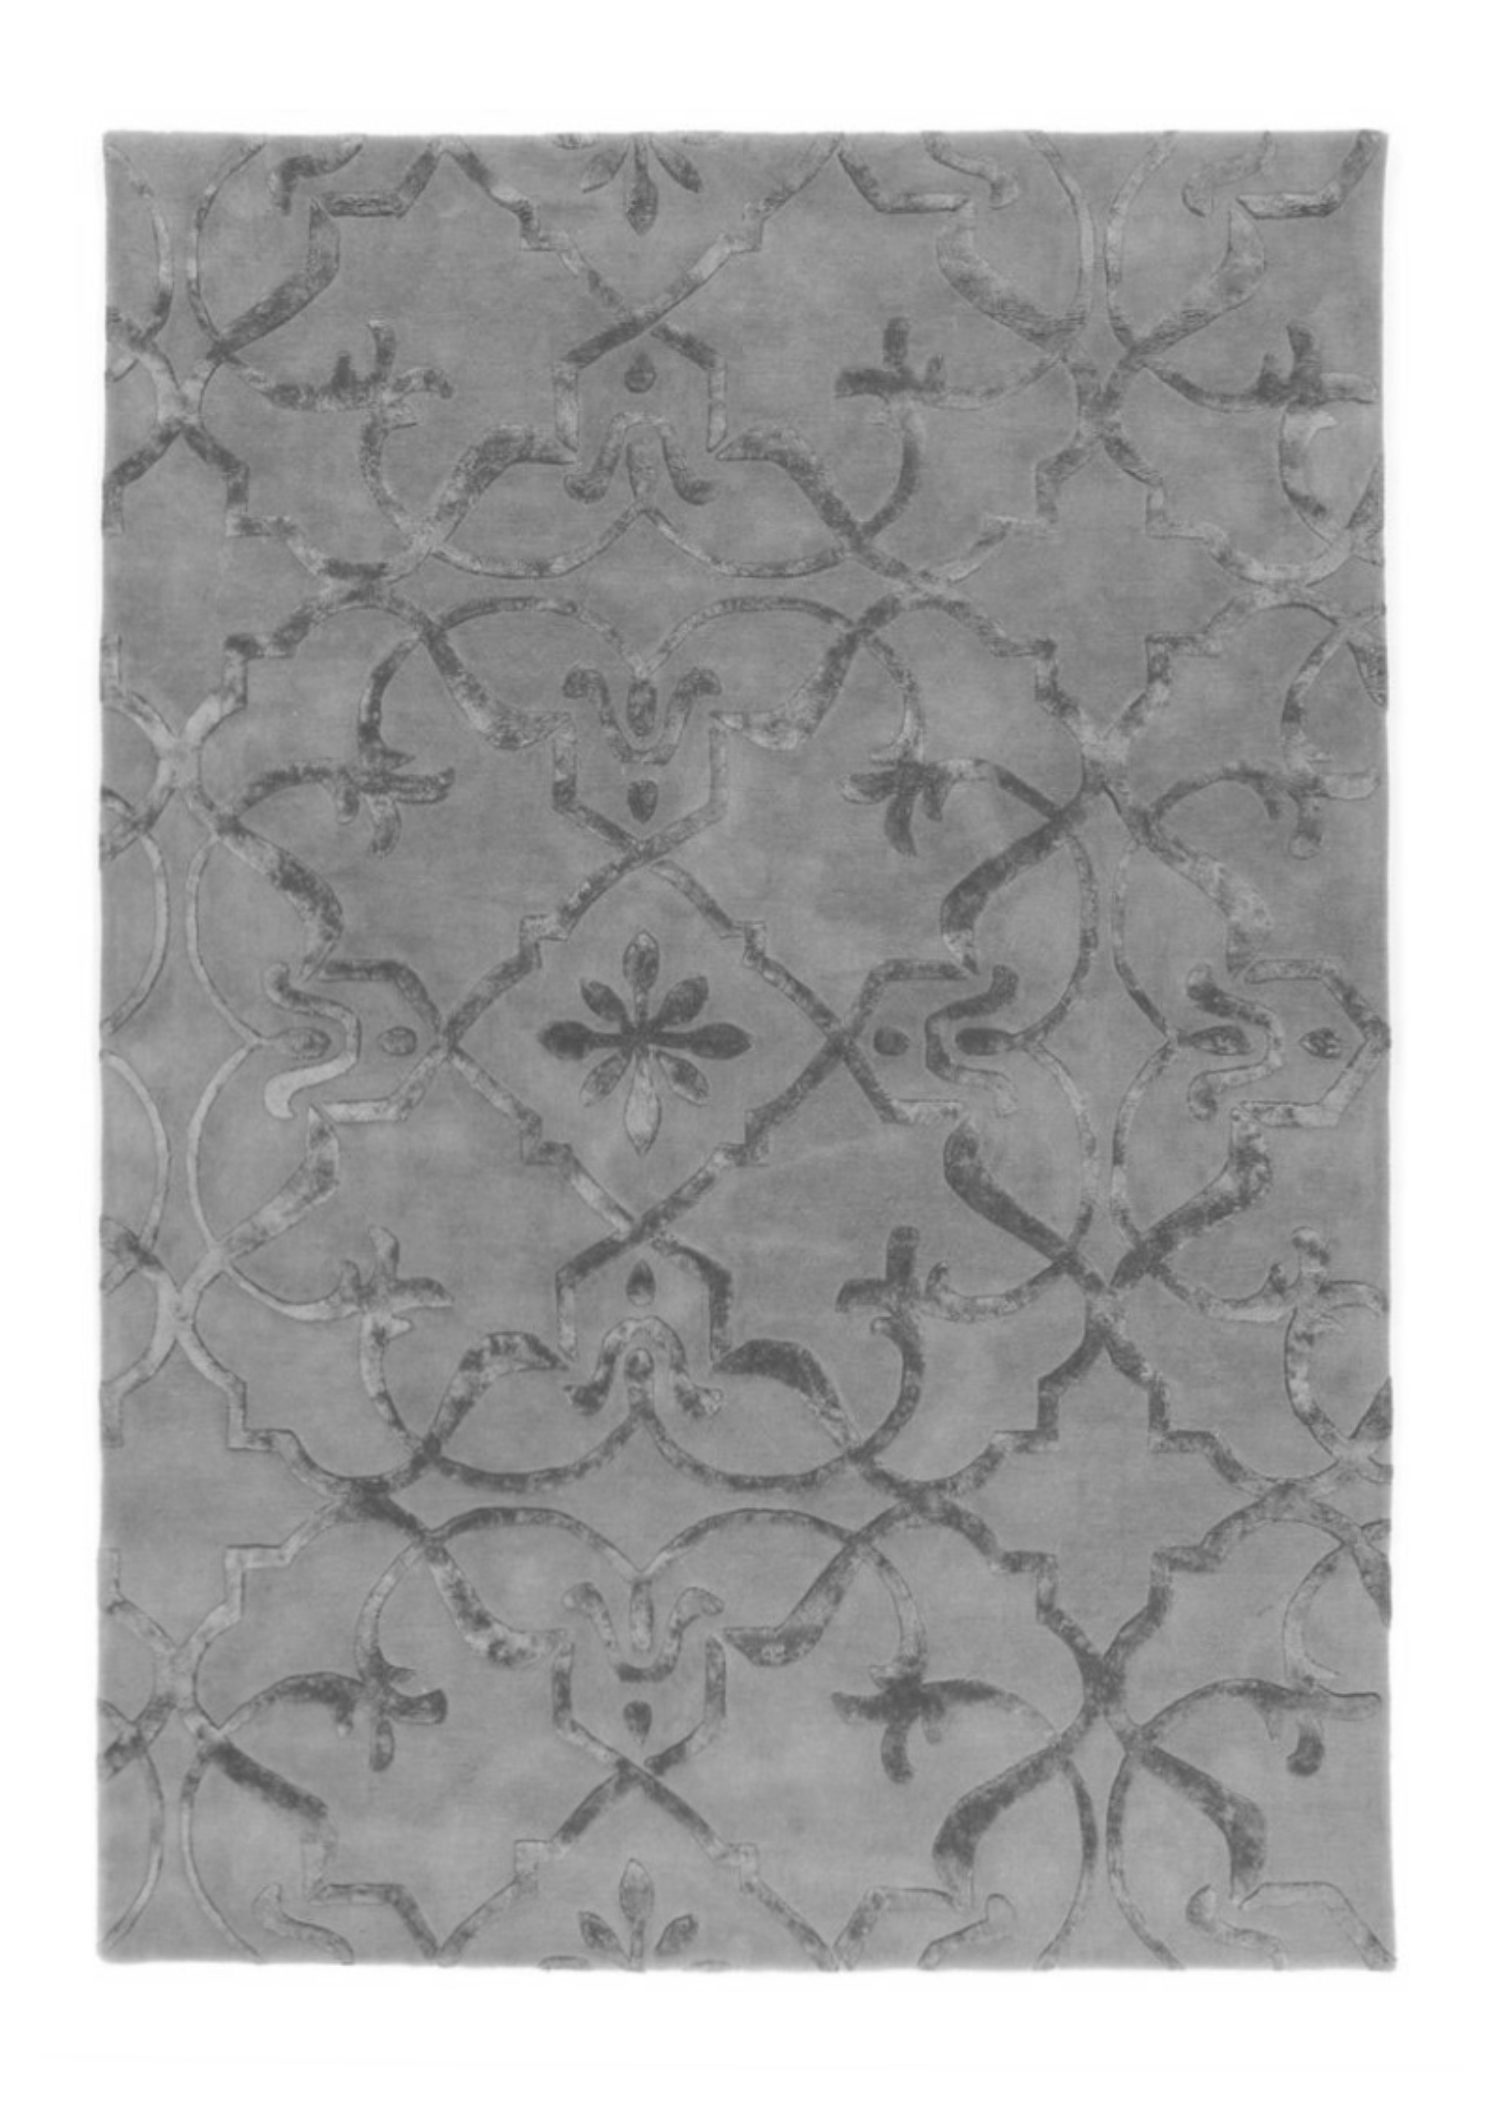 Inspired by old embossed wallpaper from the 19th century.